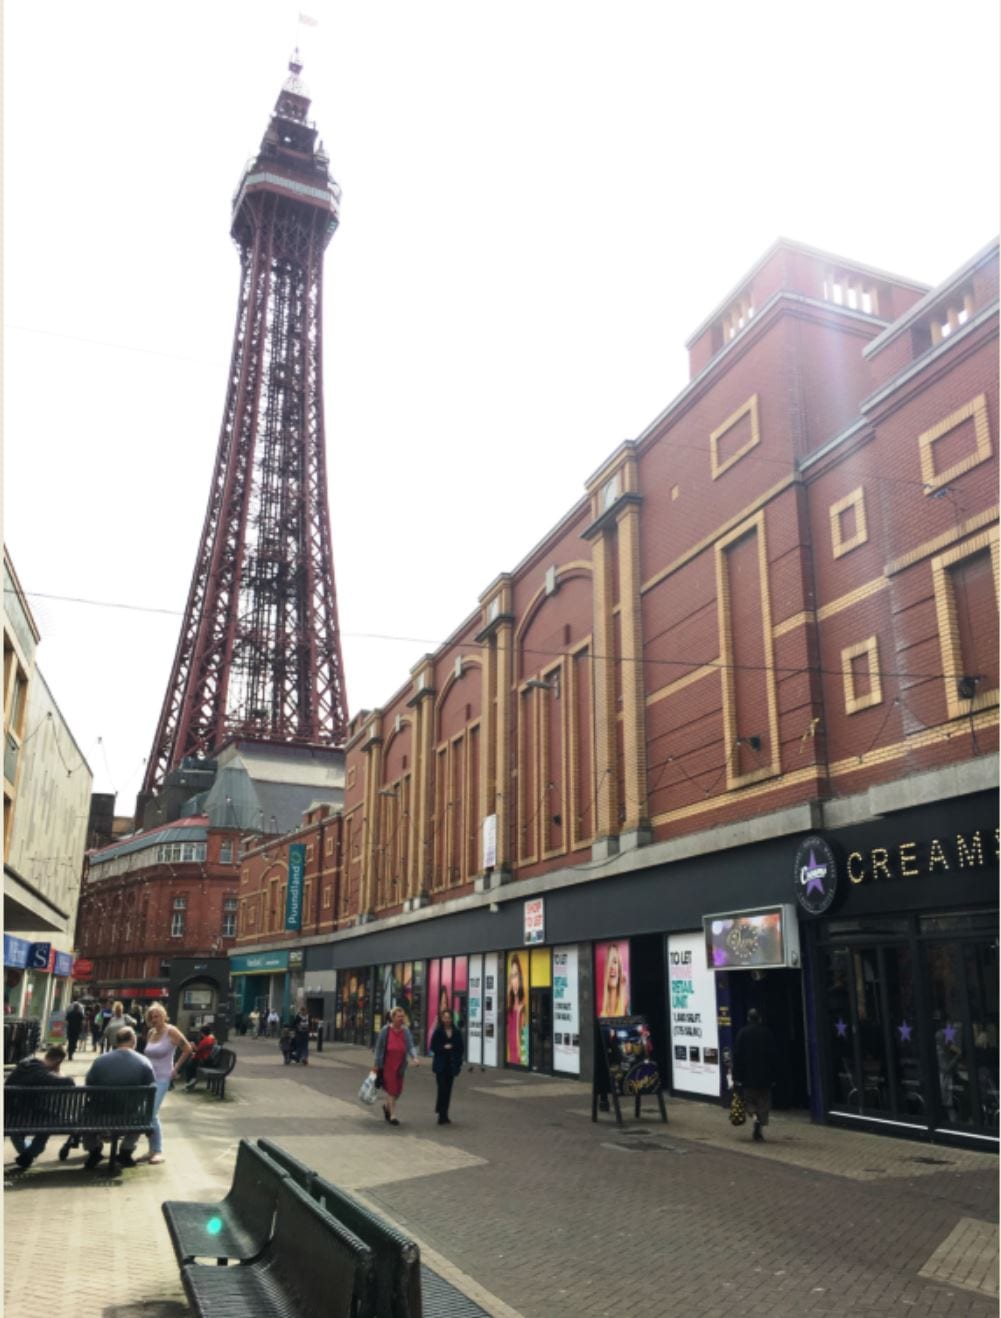 Throughout the Covid pandemic we've walked through the streets to bring you a series of videos showing 12 months in Blackpool town centre.